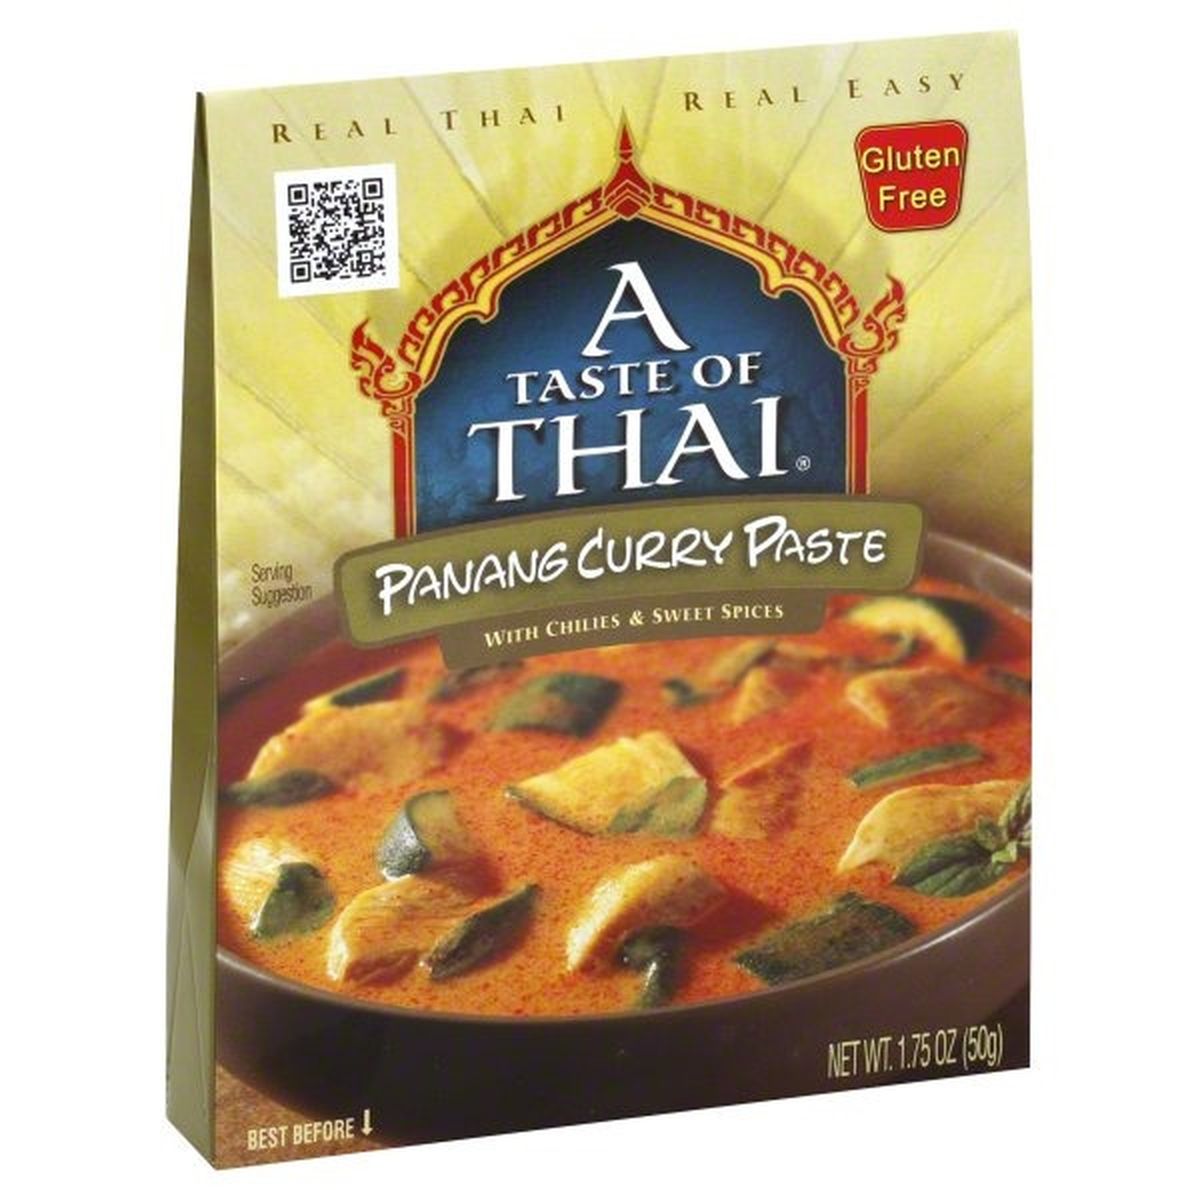 Calories in A Taste of Thai Panang Curry Paste